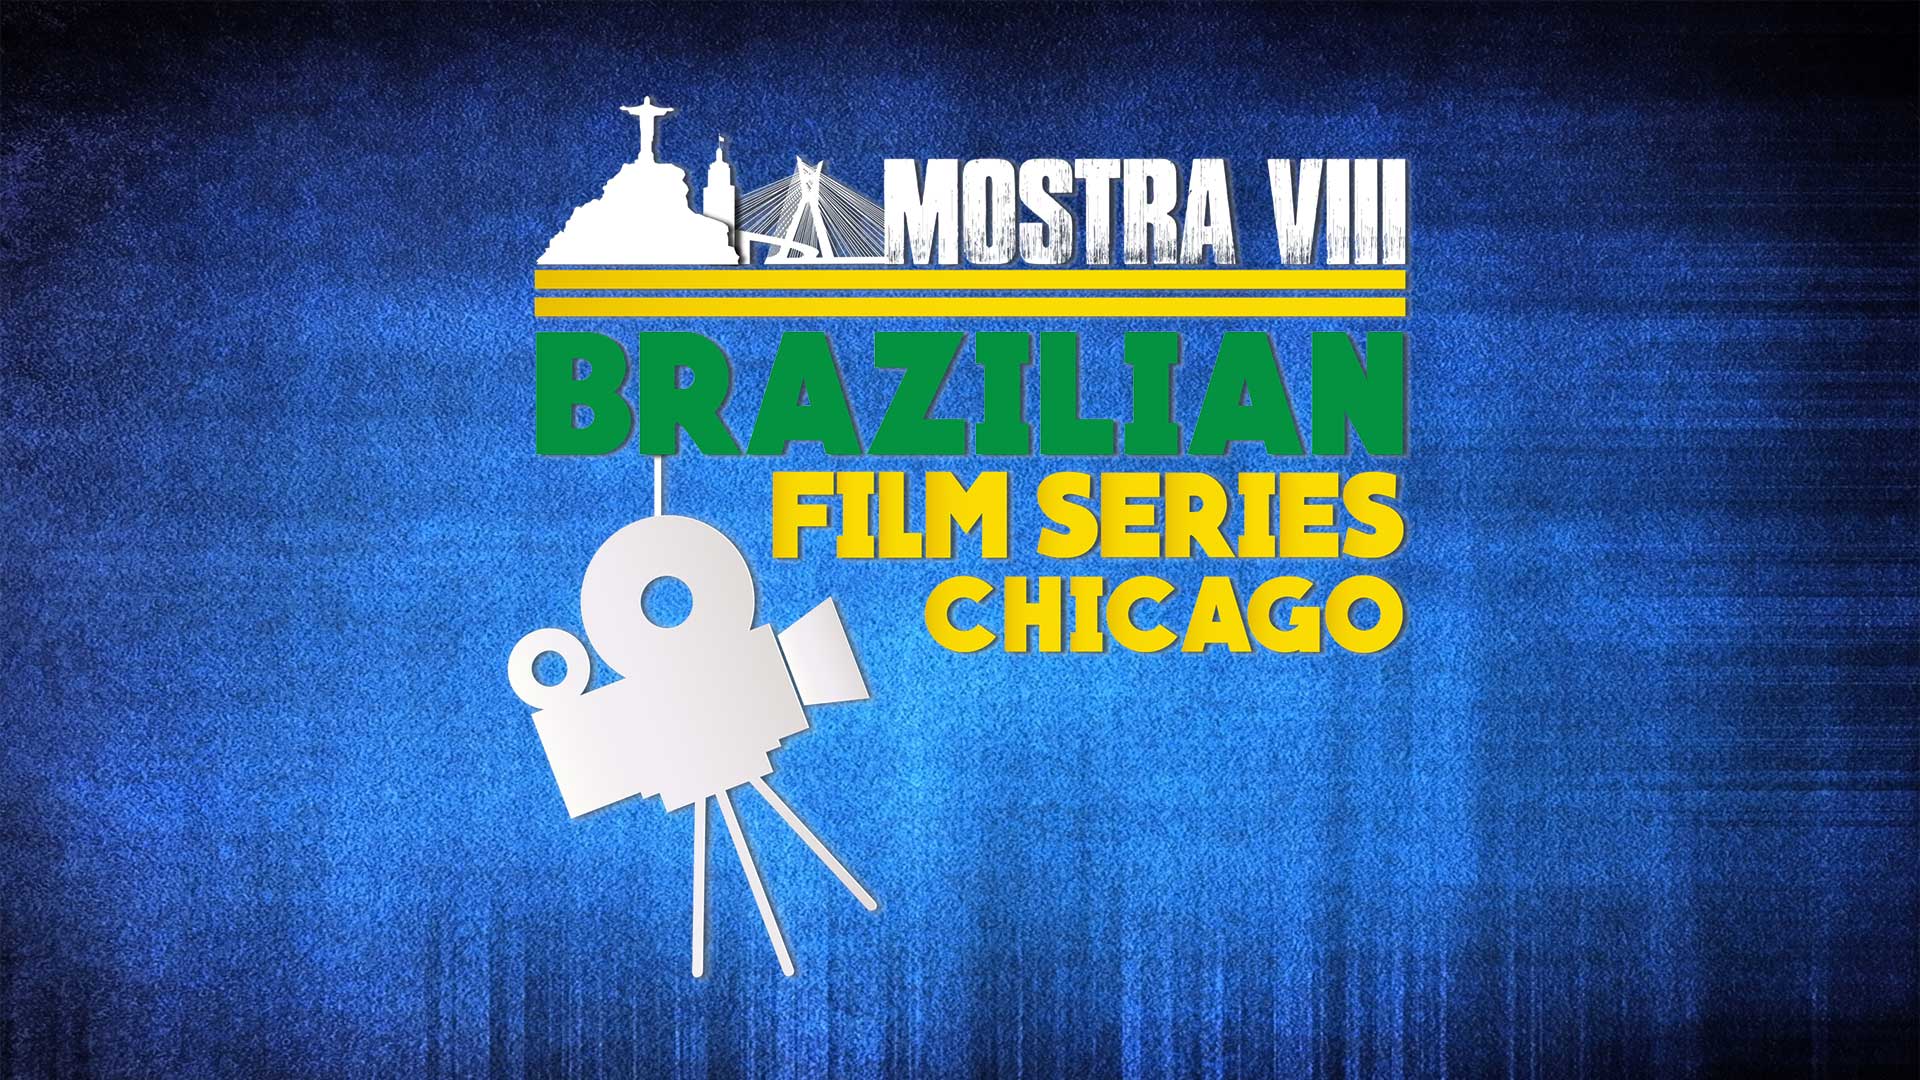 Mostra VIII Brazilian Film Series Chicago with video camera icon and blue background